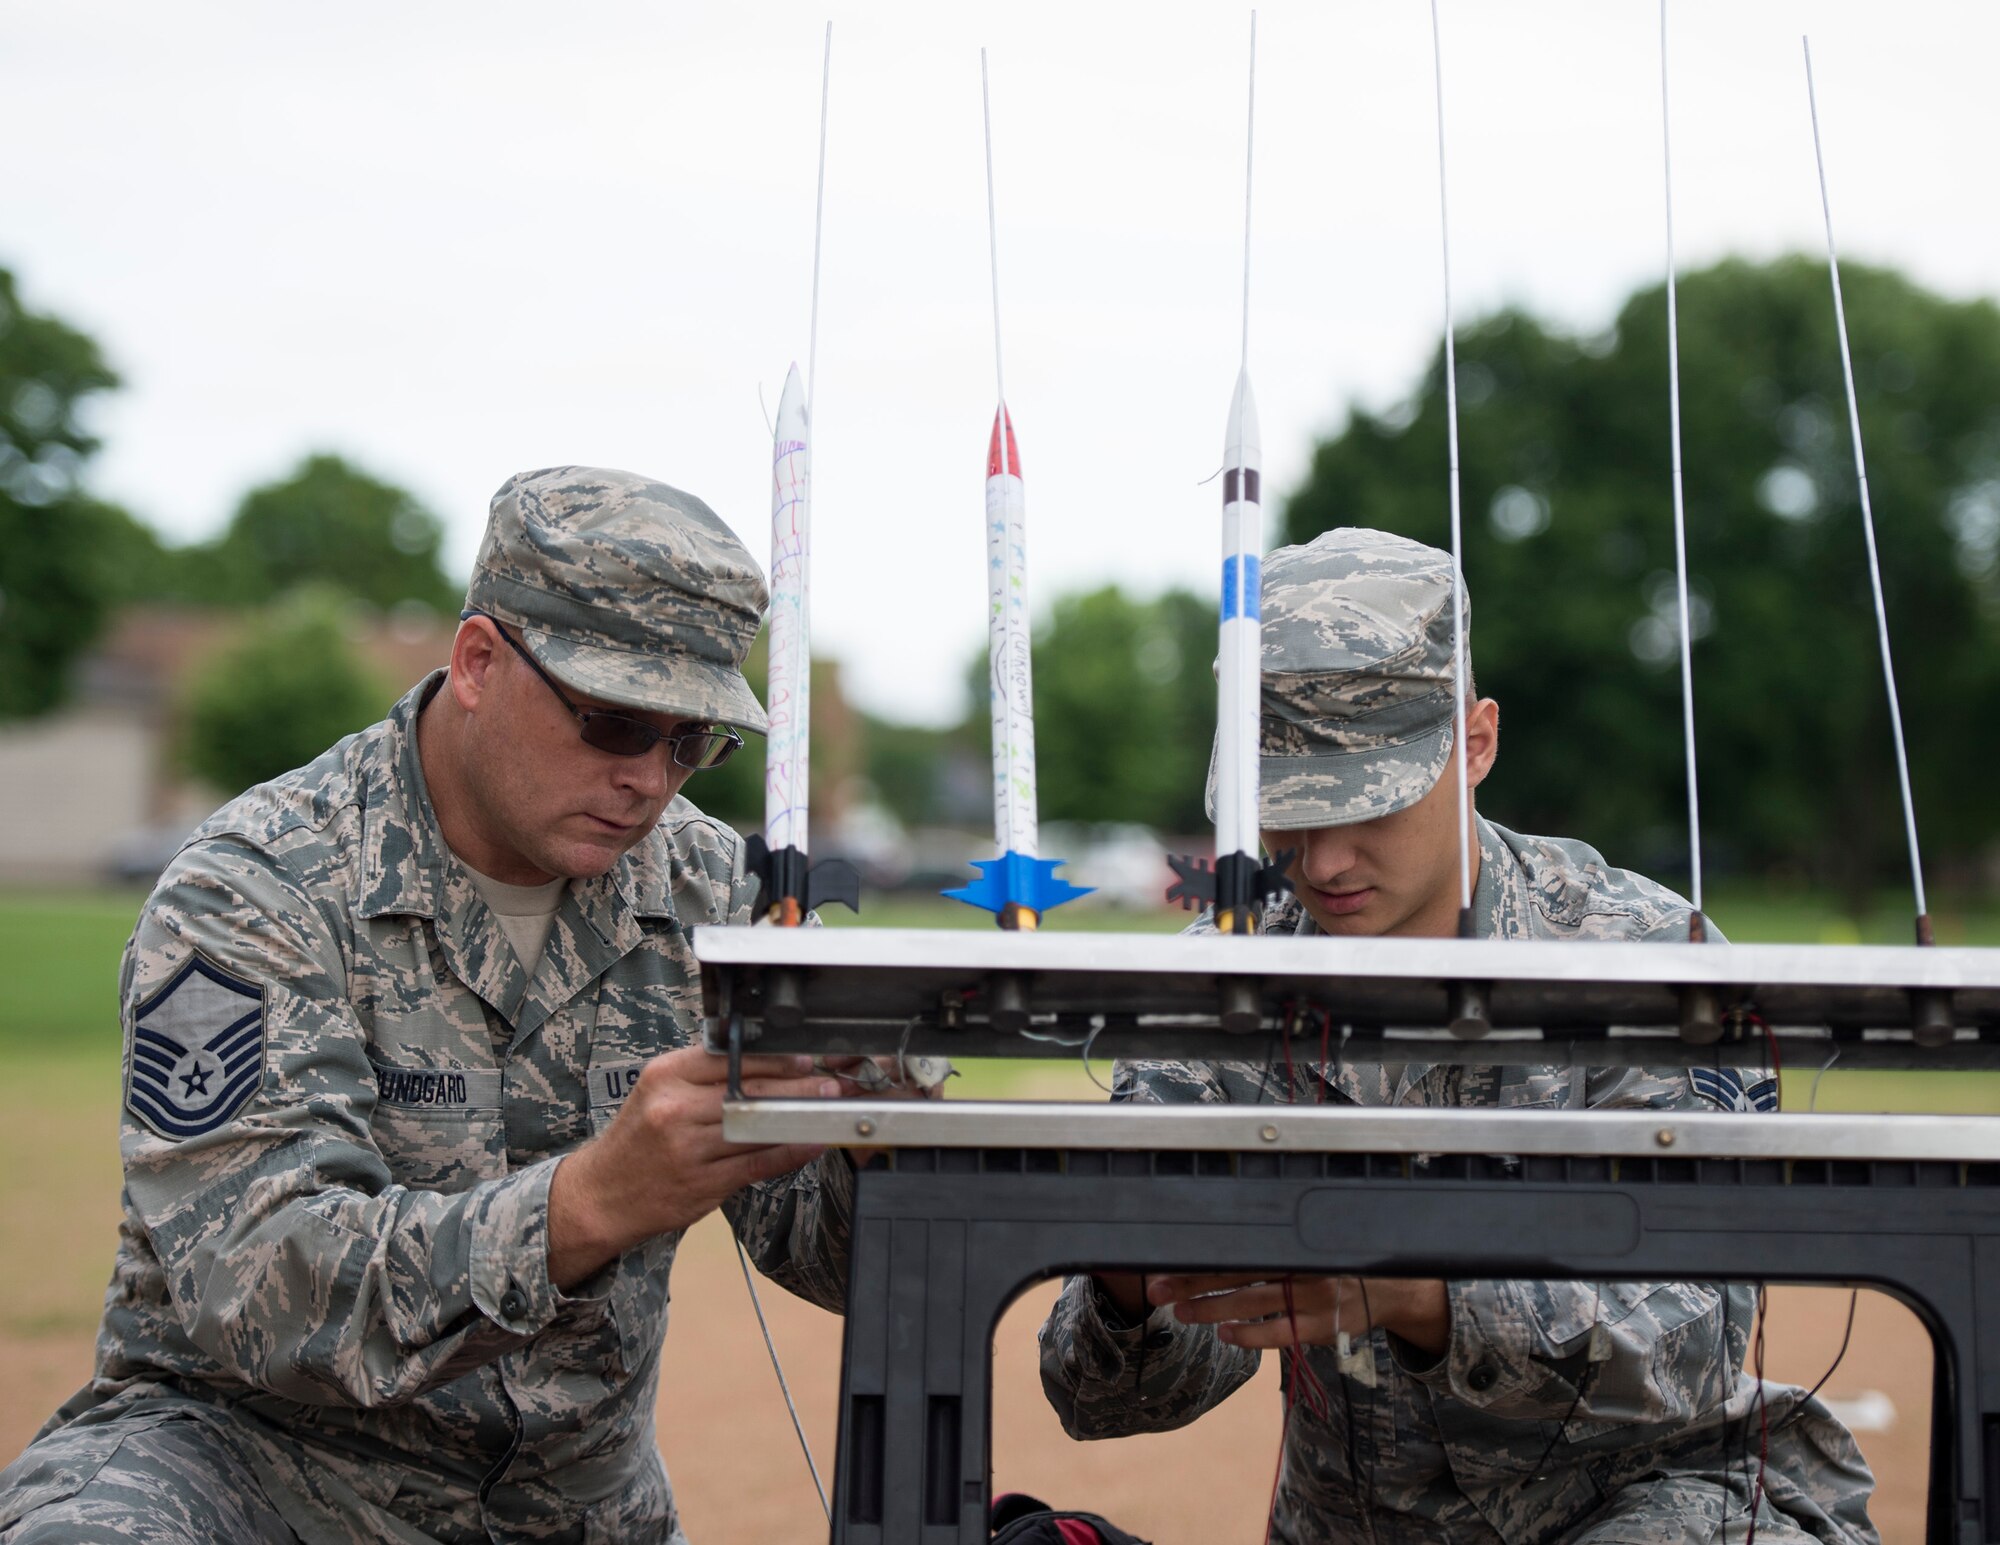 U.S. Air Force Master Sgt. Jeremy Bundgard, 133rd Logistics Readiness Squadron, left, and Senior Airman Geoffrey Slaughter, 133rd Aircraft Maintenance Squadron, attach wires to the rockets in St. Paul, Minn., July 18, 2019.